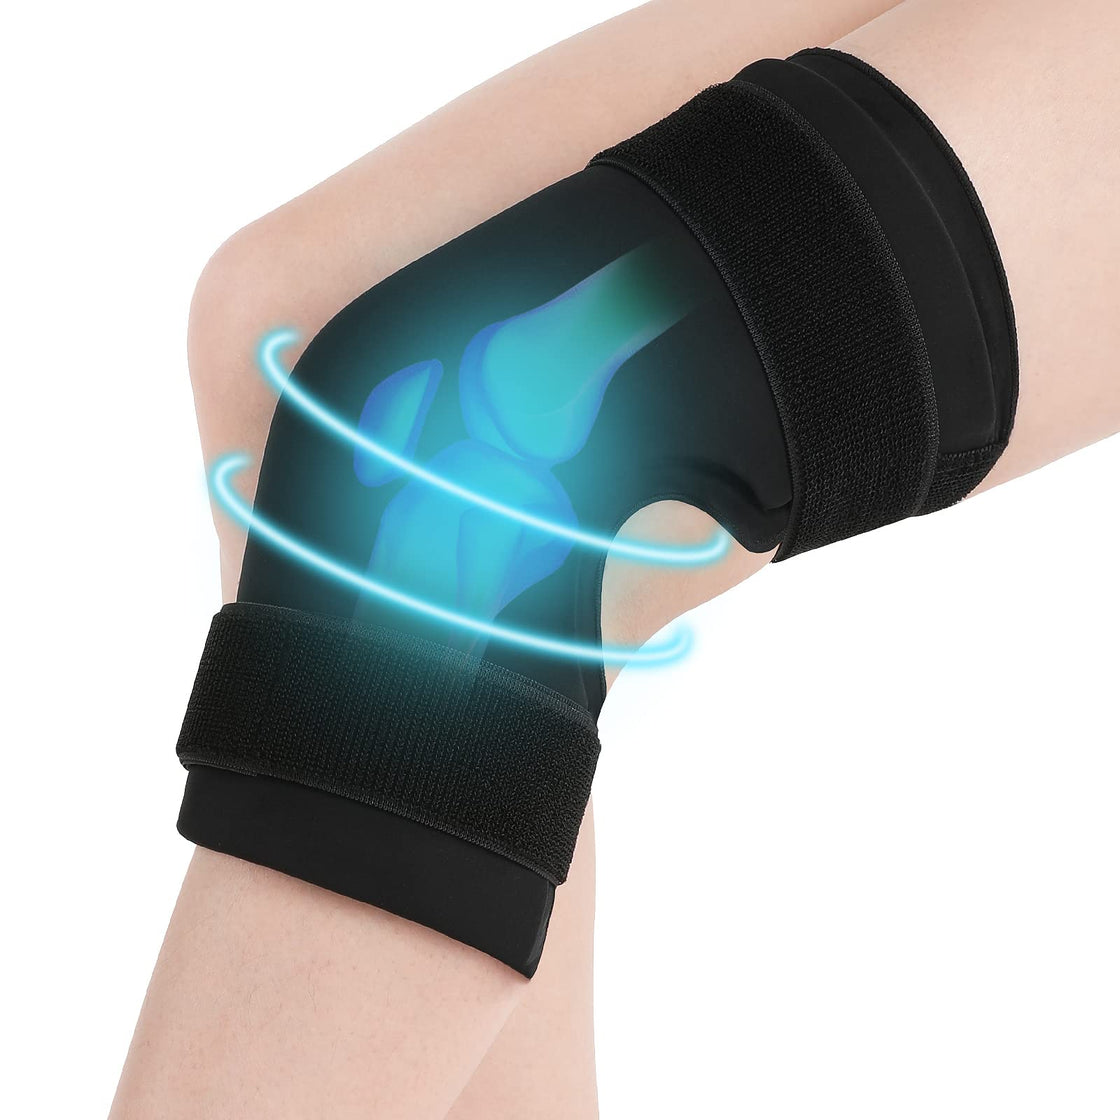 Tolaccea Knee Ice Pack for Pain Relief for Knee